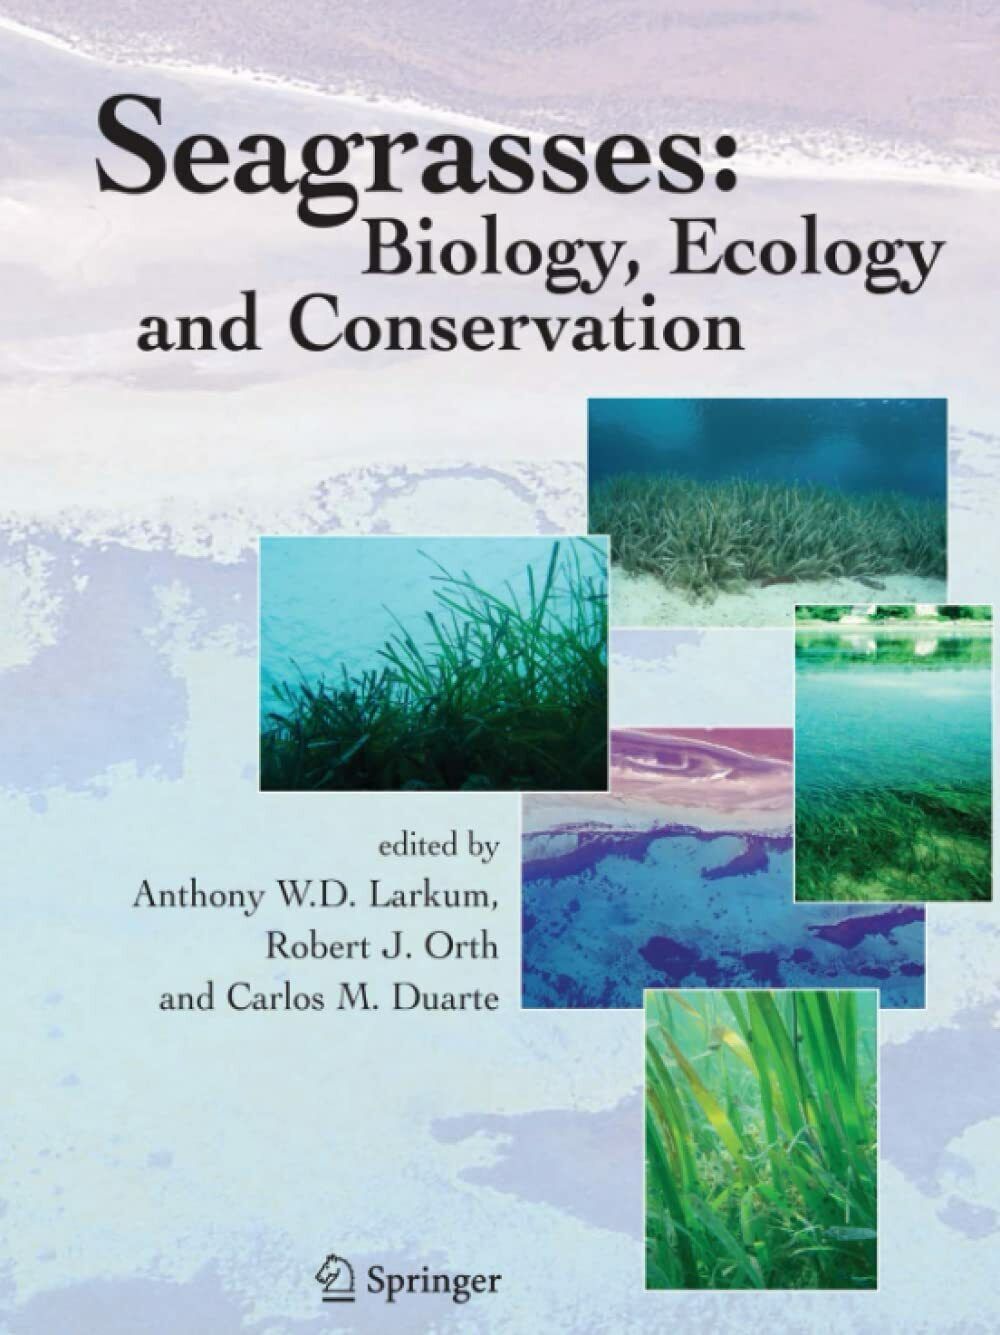 Seagrasses: Biology, Ecology and Conservation - Anthony W. D. Larkum - 2011 libro usato